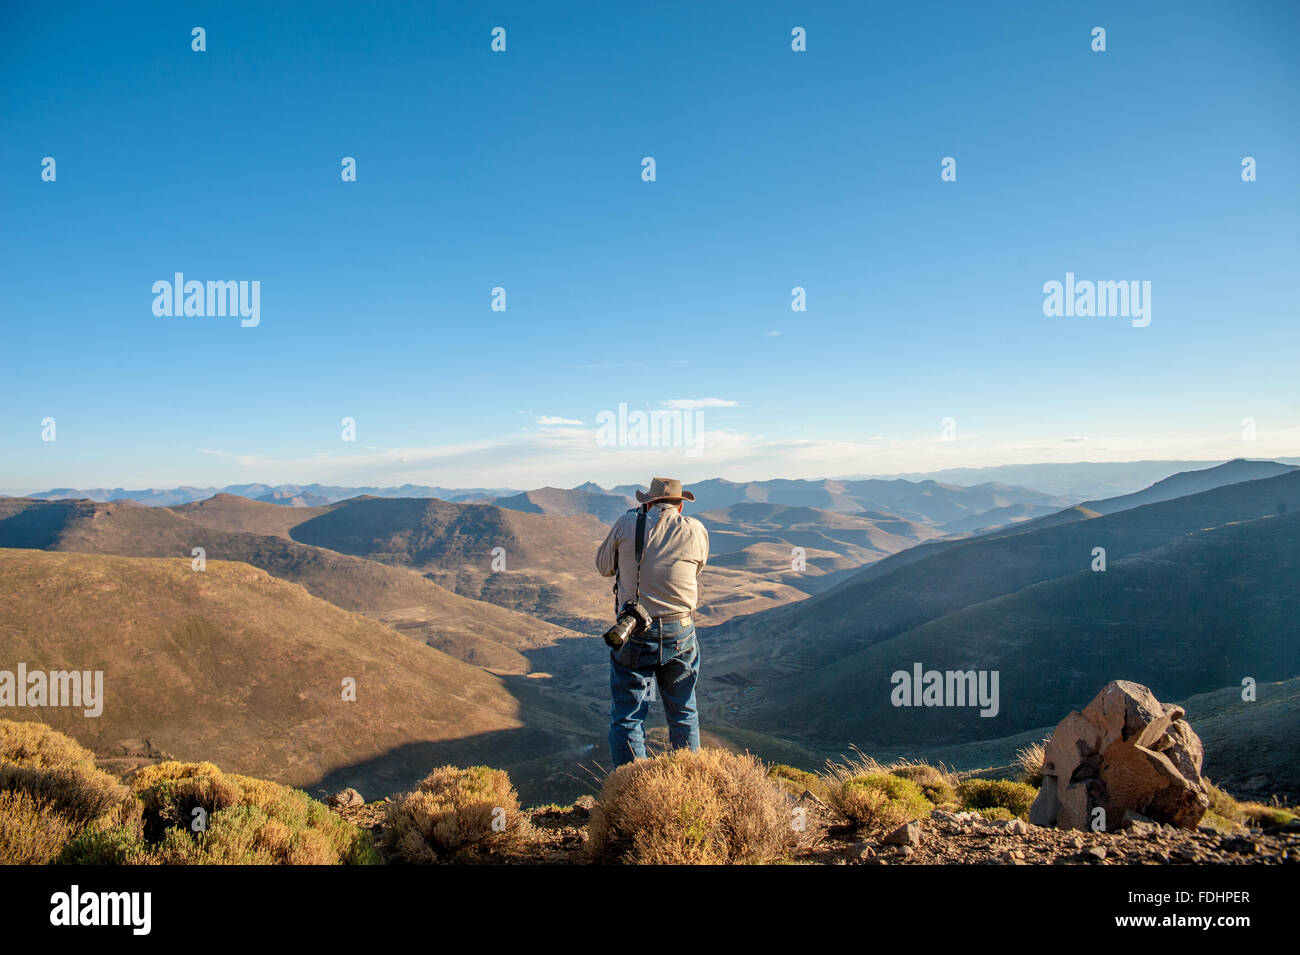 Tourist photographing the landscape of mountains in Lesotho, Africa Stock Photo